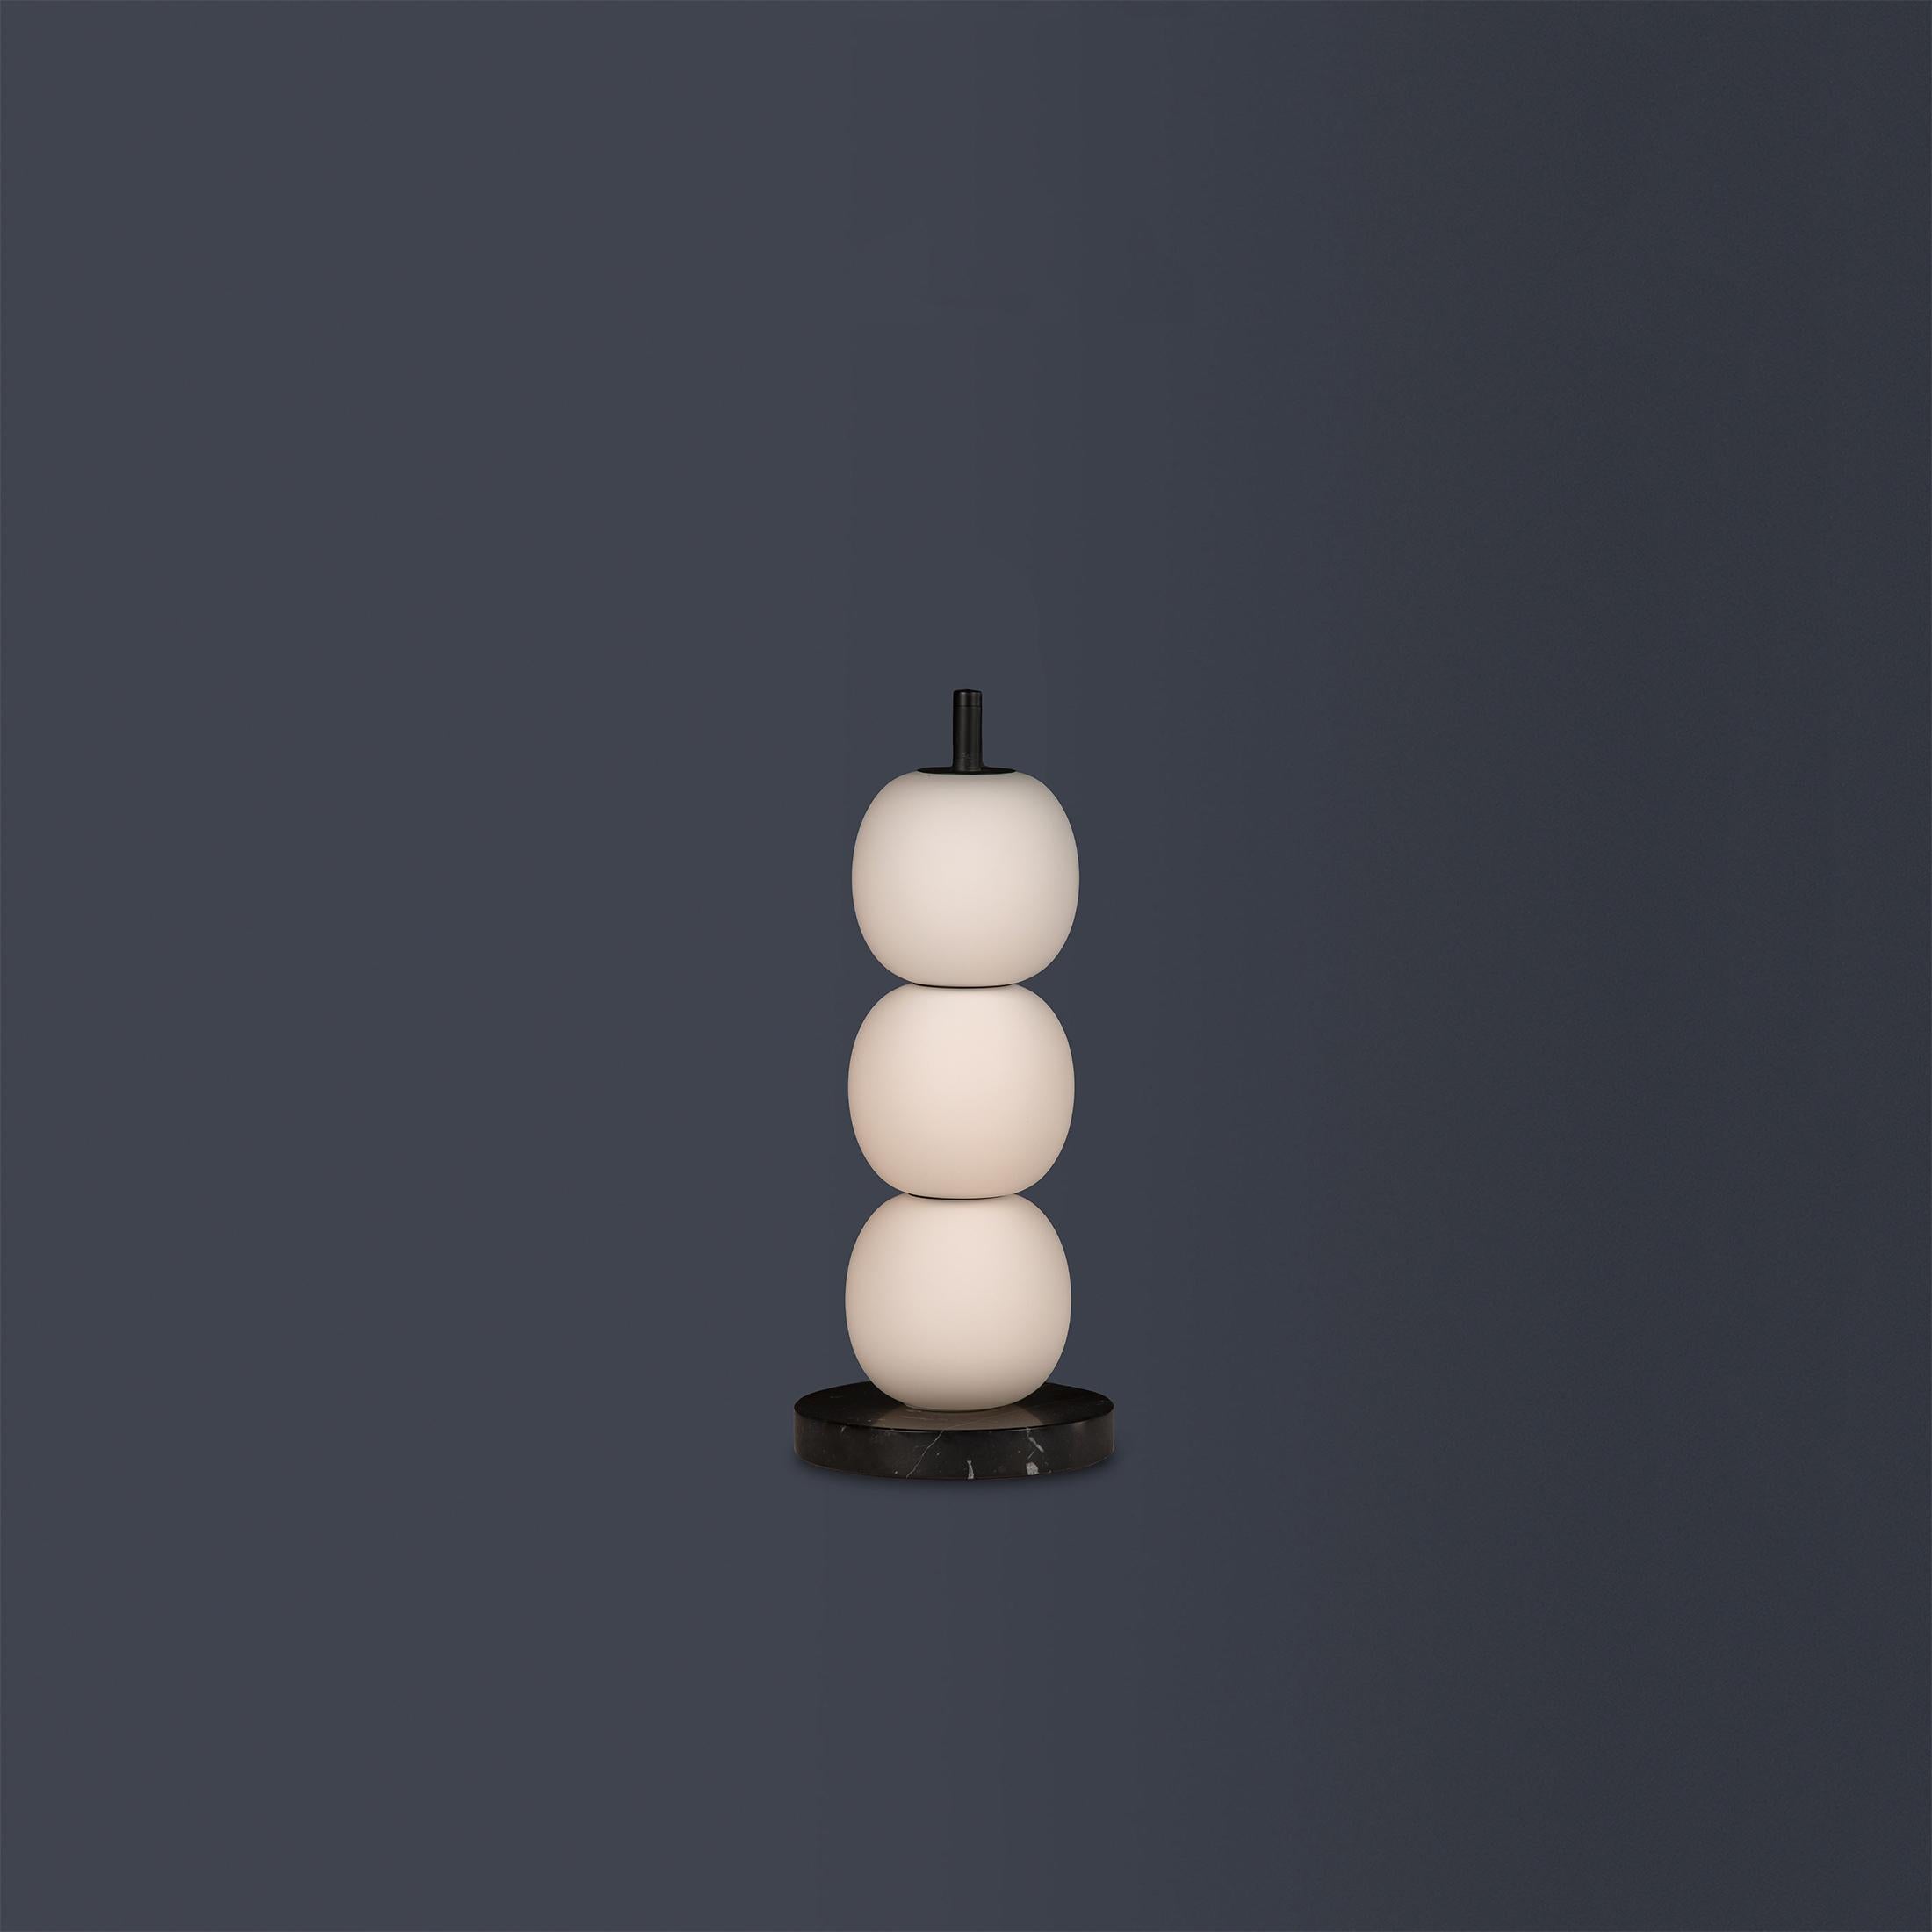 Organic Modern Table Lamp 'Mainkai 3' by Man of Parts, Nero Marquina Marble For Sale